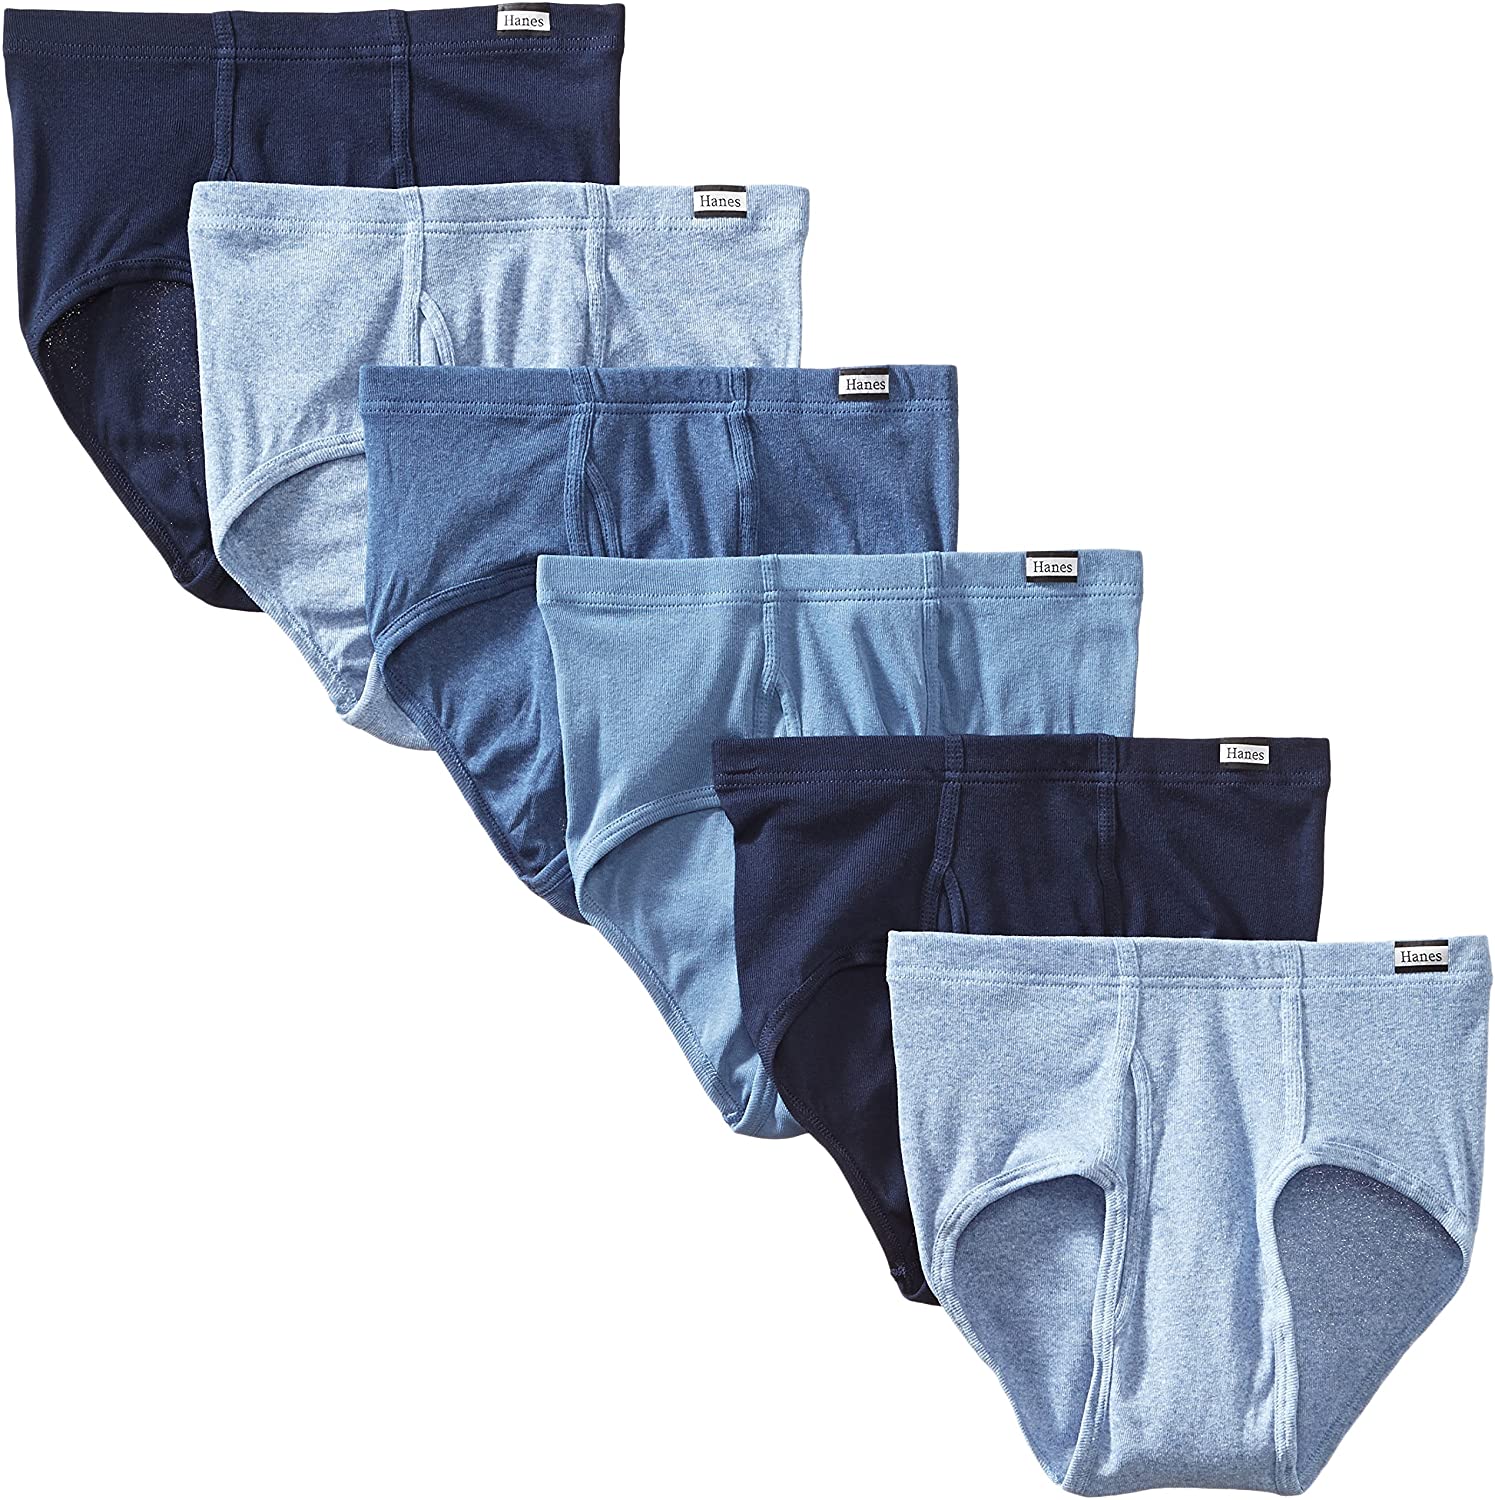 Hanes Men's 6-Pack Tagless No Ride Up Briefs with ComfortSoft Waistband